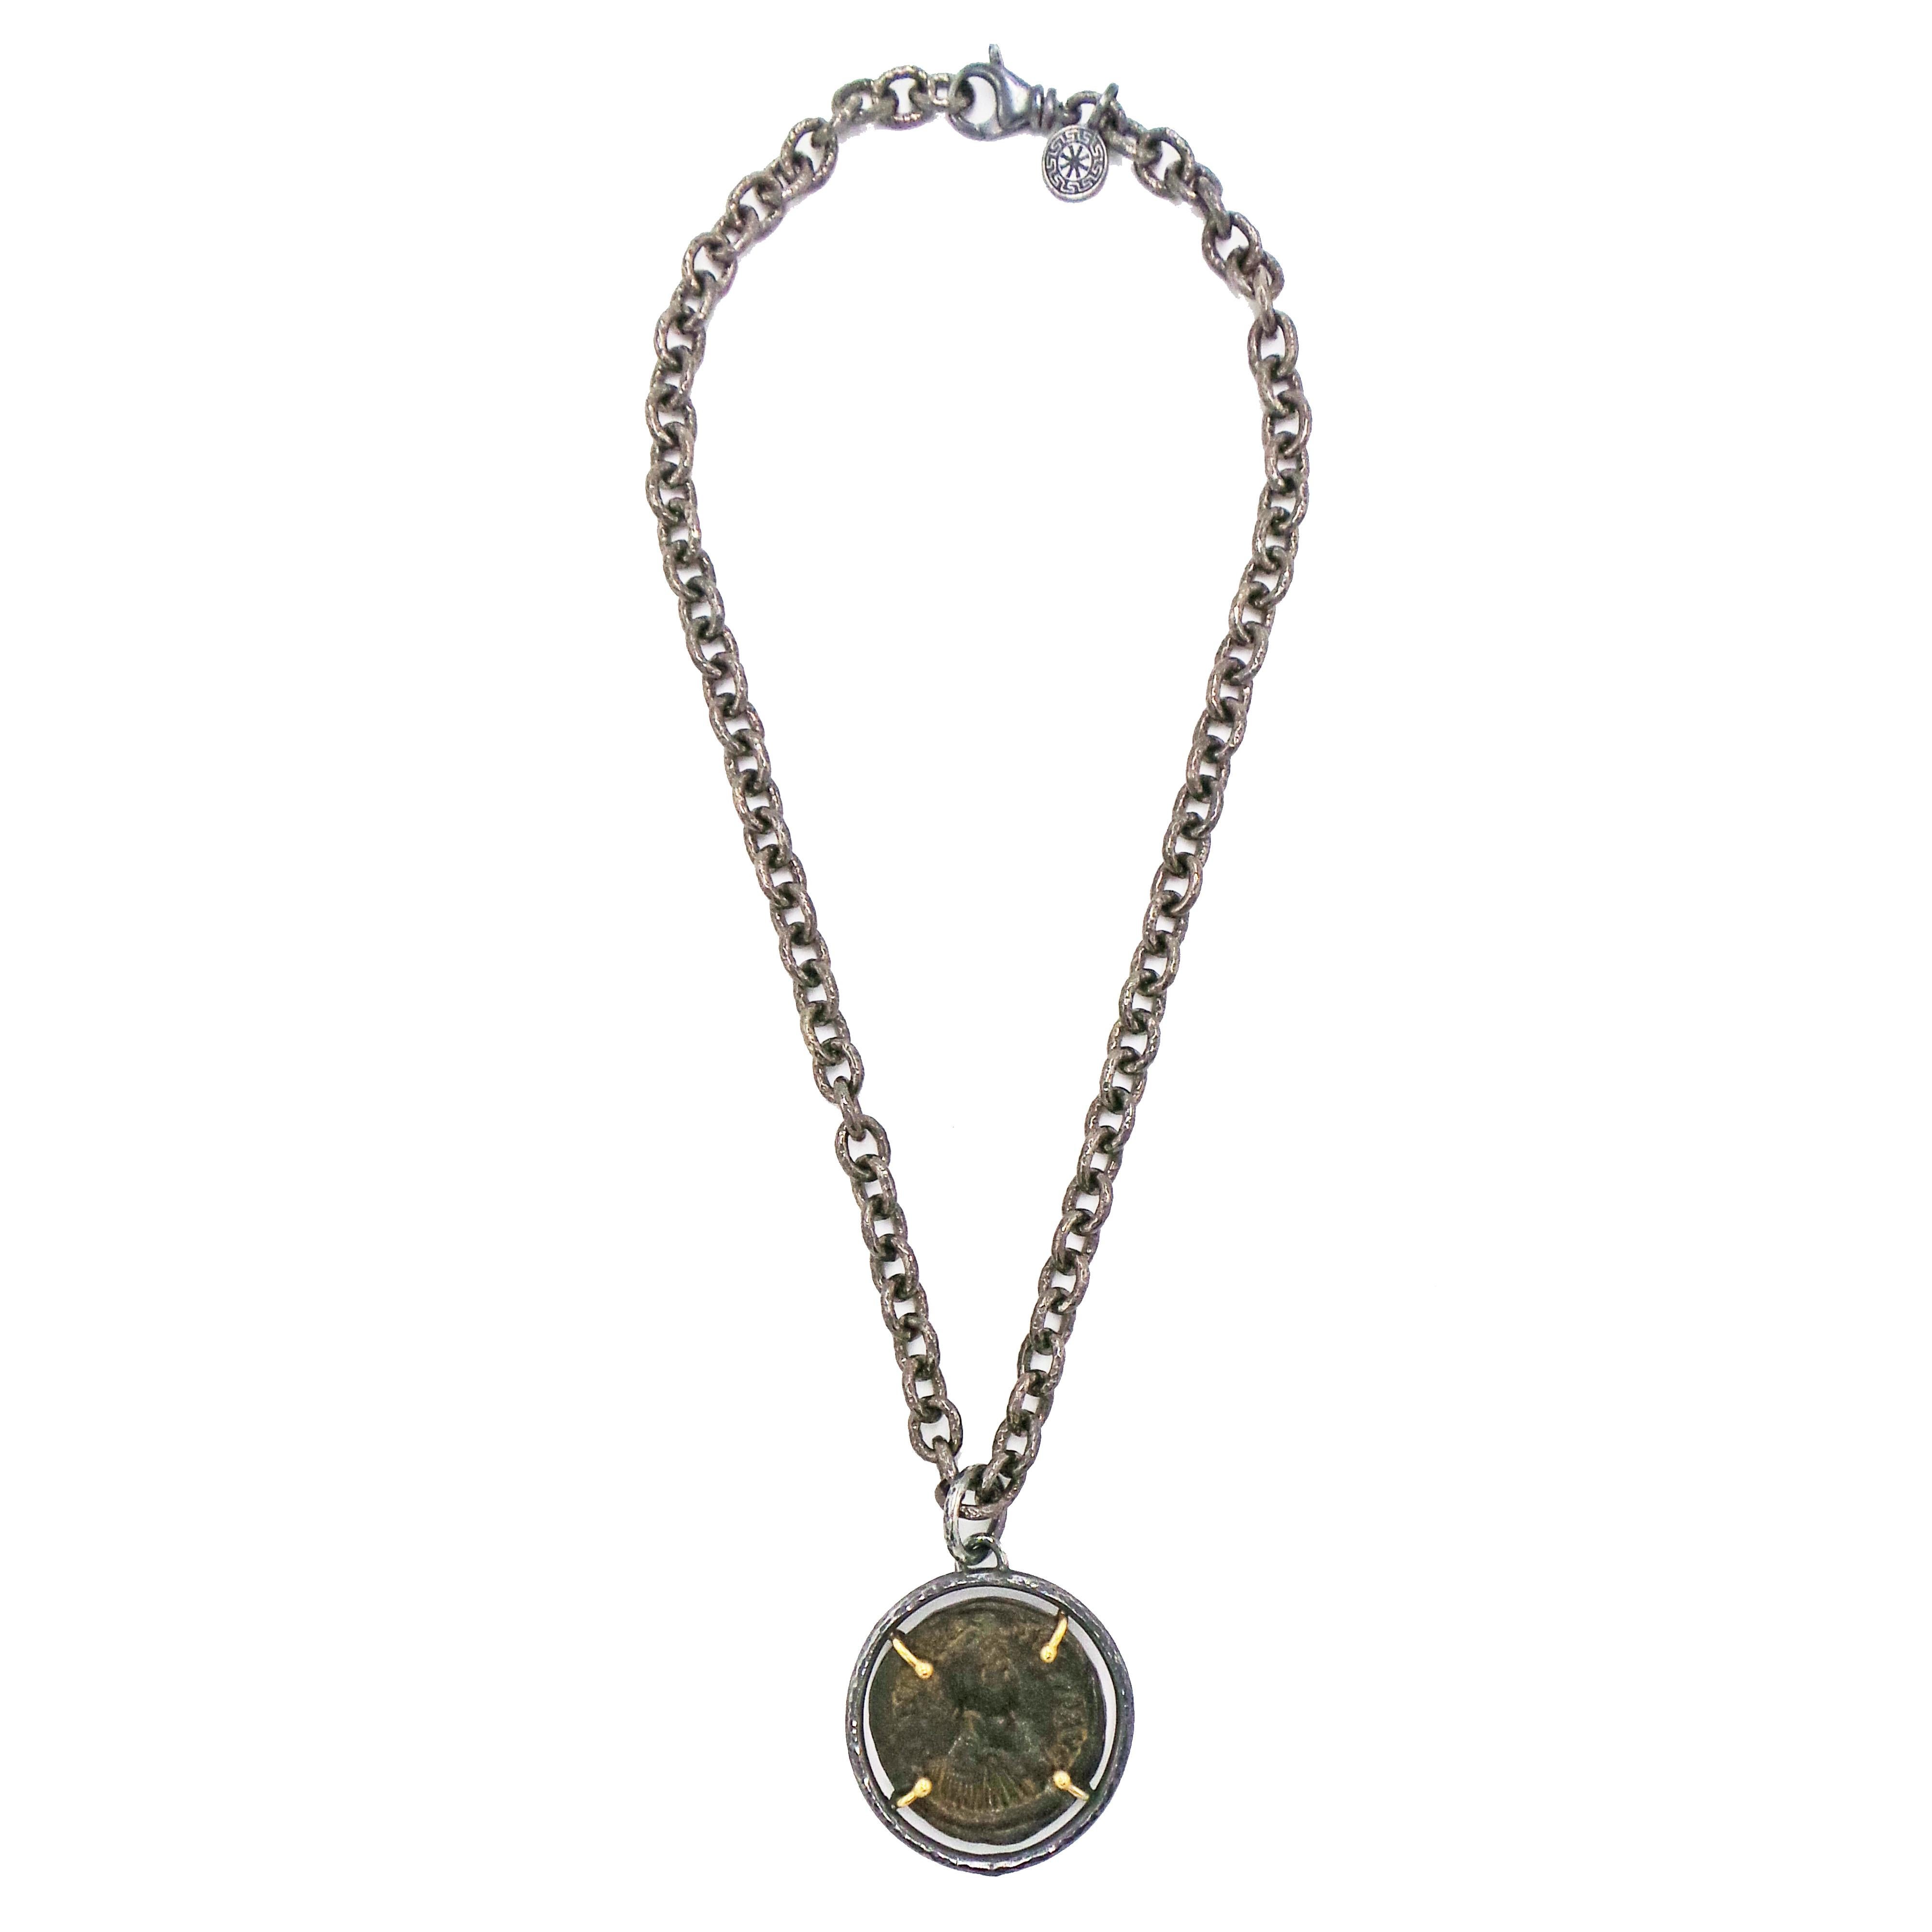 Authentic ancient Byzantine bronze coin (Justin 1, Follis, Constantinople mint, 518-527 A.D.) set in oxidized sterling silver and 22k yellow gold hand-fabricated pendant on a heavy, handmade oxidized sterling silver cable chain with lobster clasp.